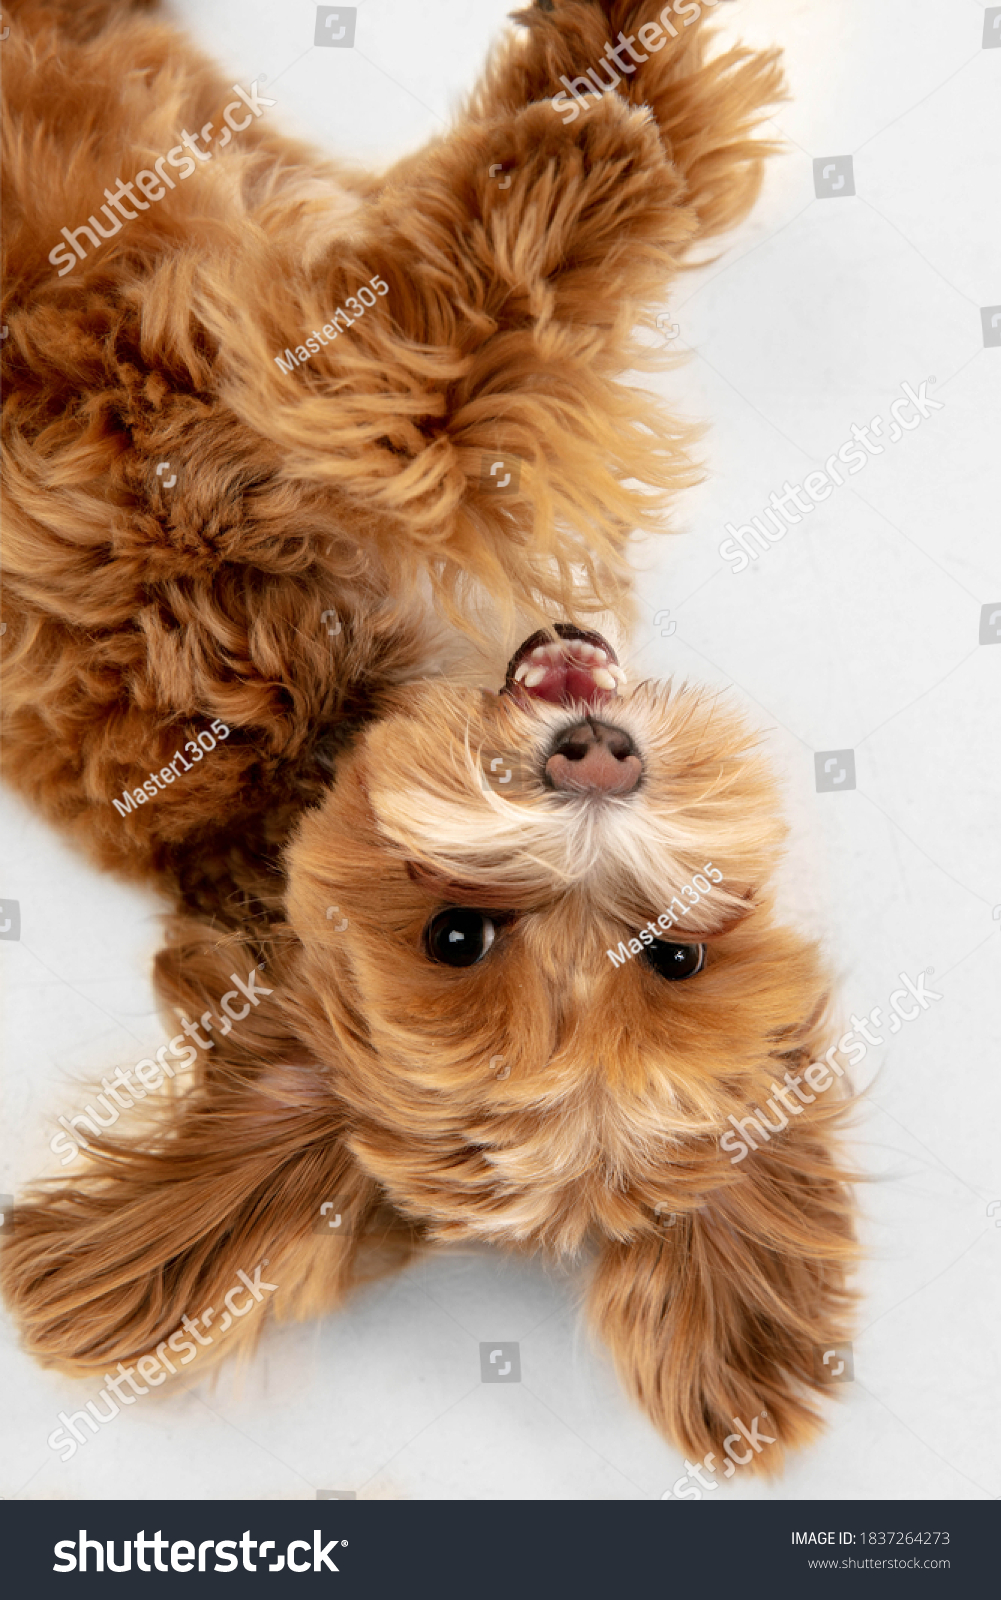 Happy in motion. Maltipu little dog is posing. Cute playful braun doggy or pet playing on white studio background. Concept of motion, action, movement, pets love. Looks happy, delighted, funny. #1837264273